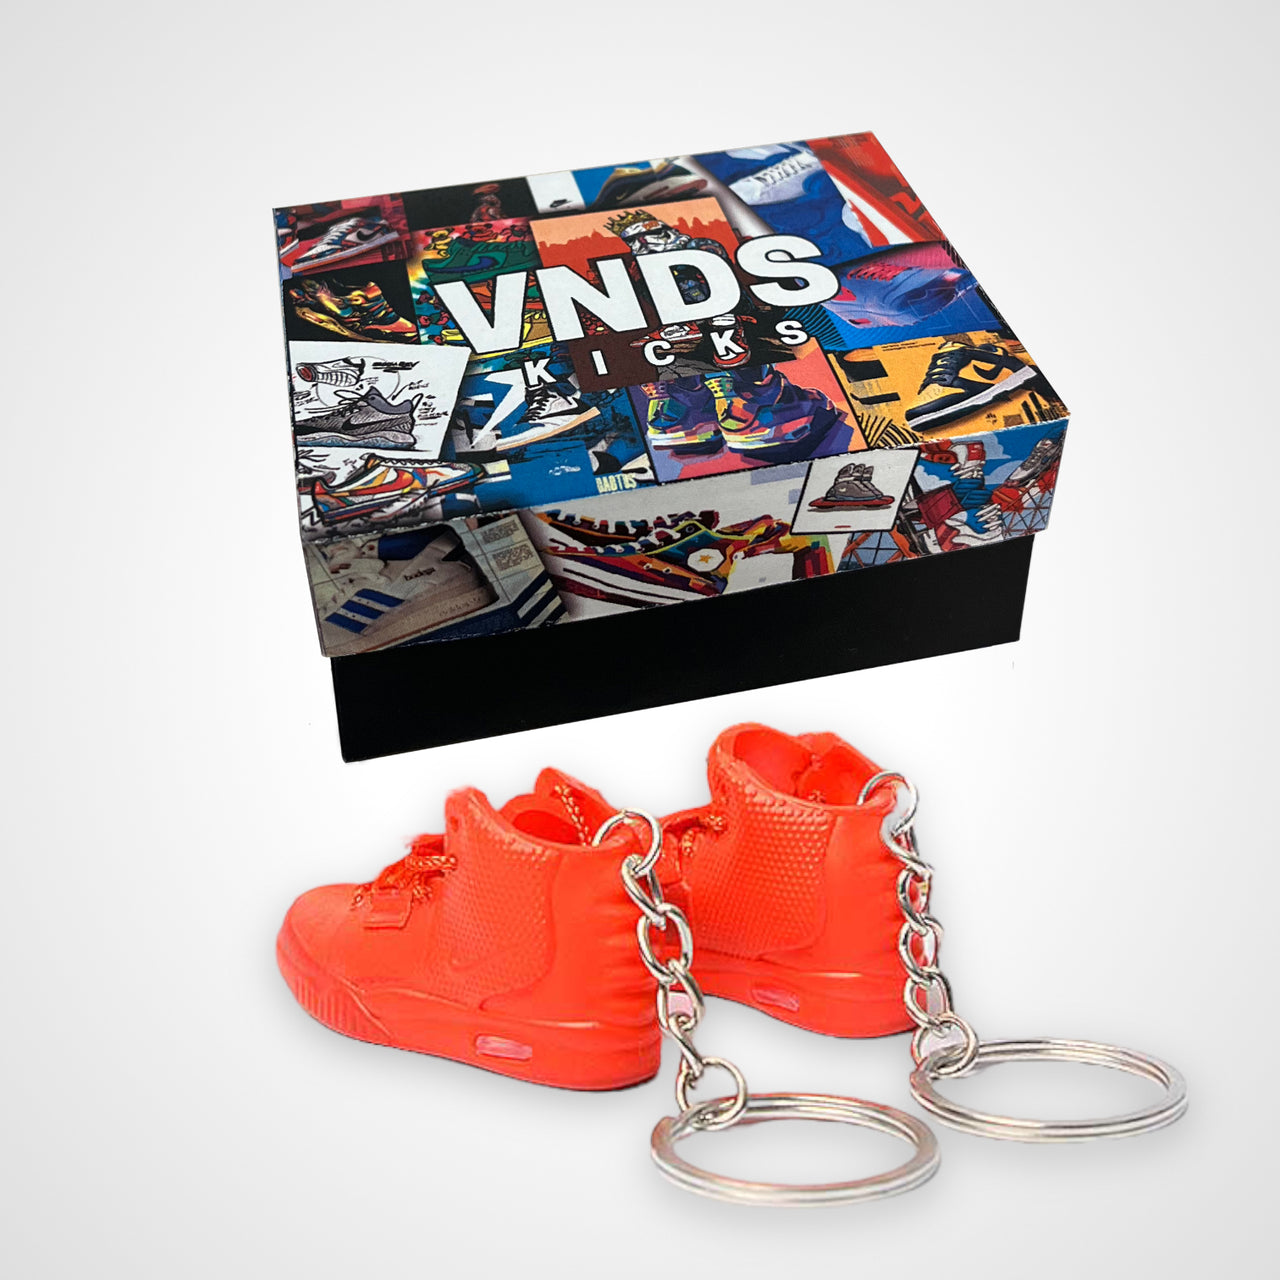 Air Yeezy 2 "Red October" - Sneakers 3D Keychain